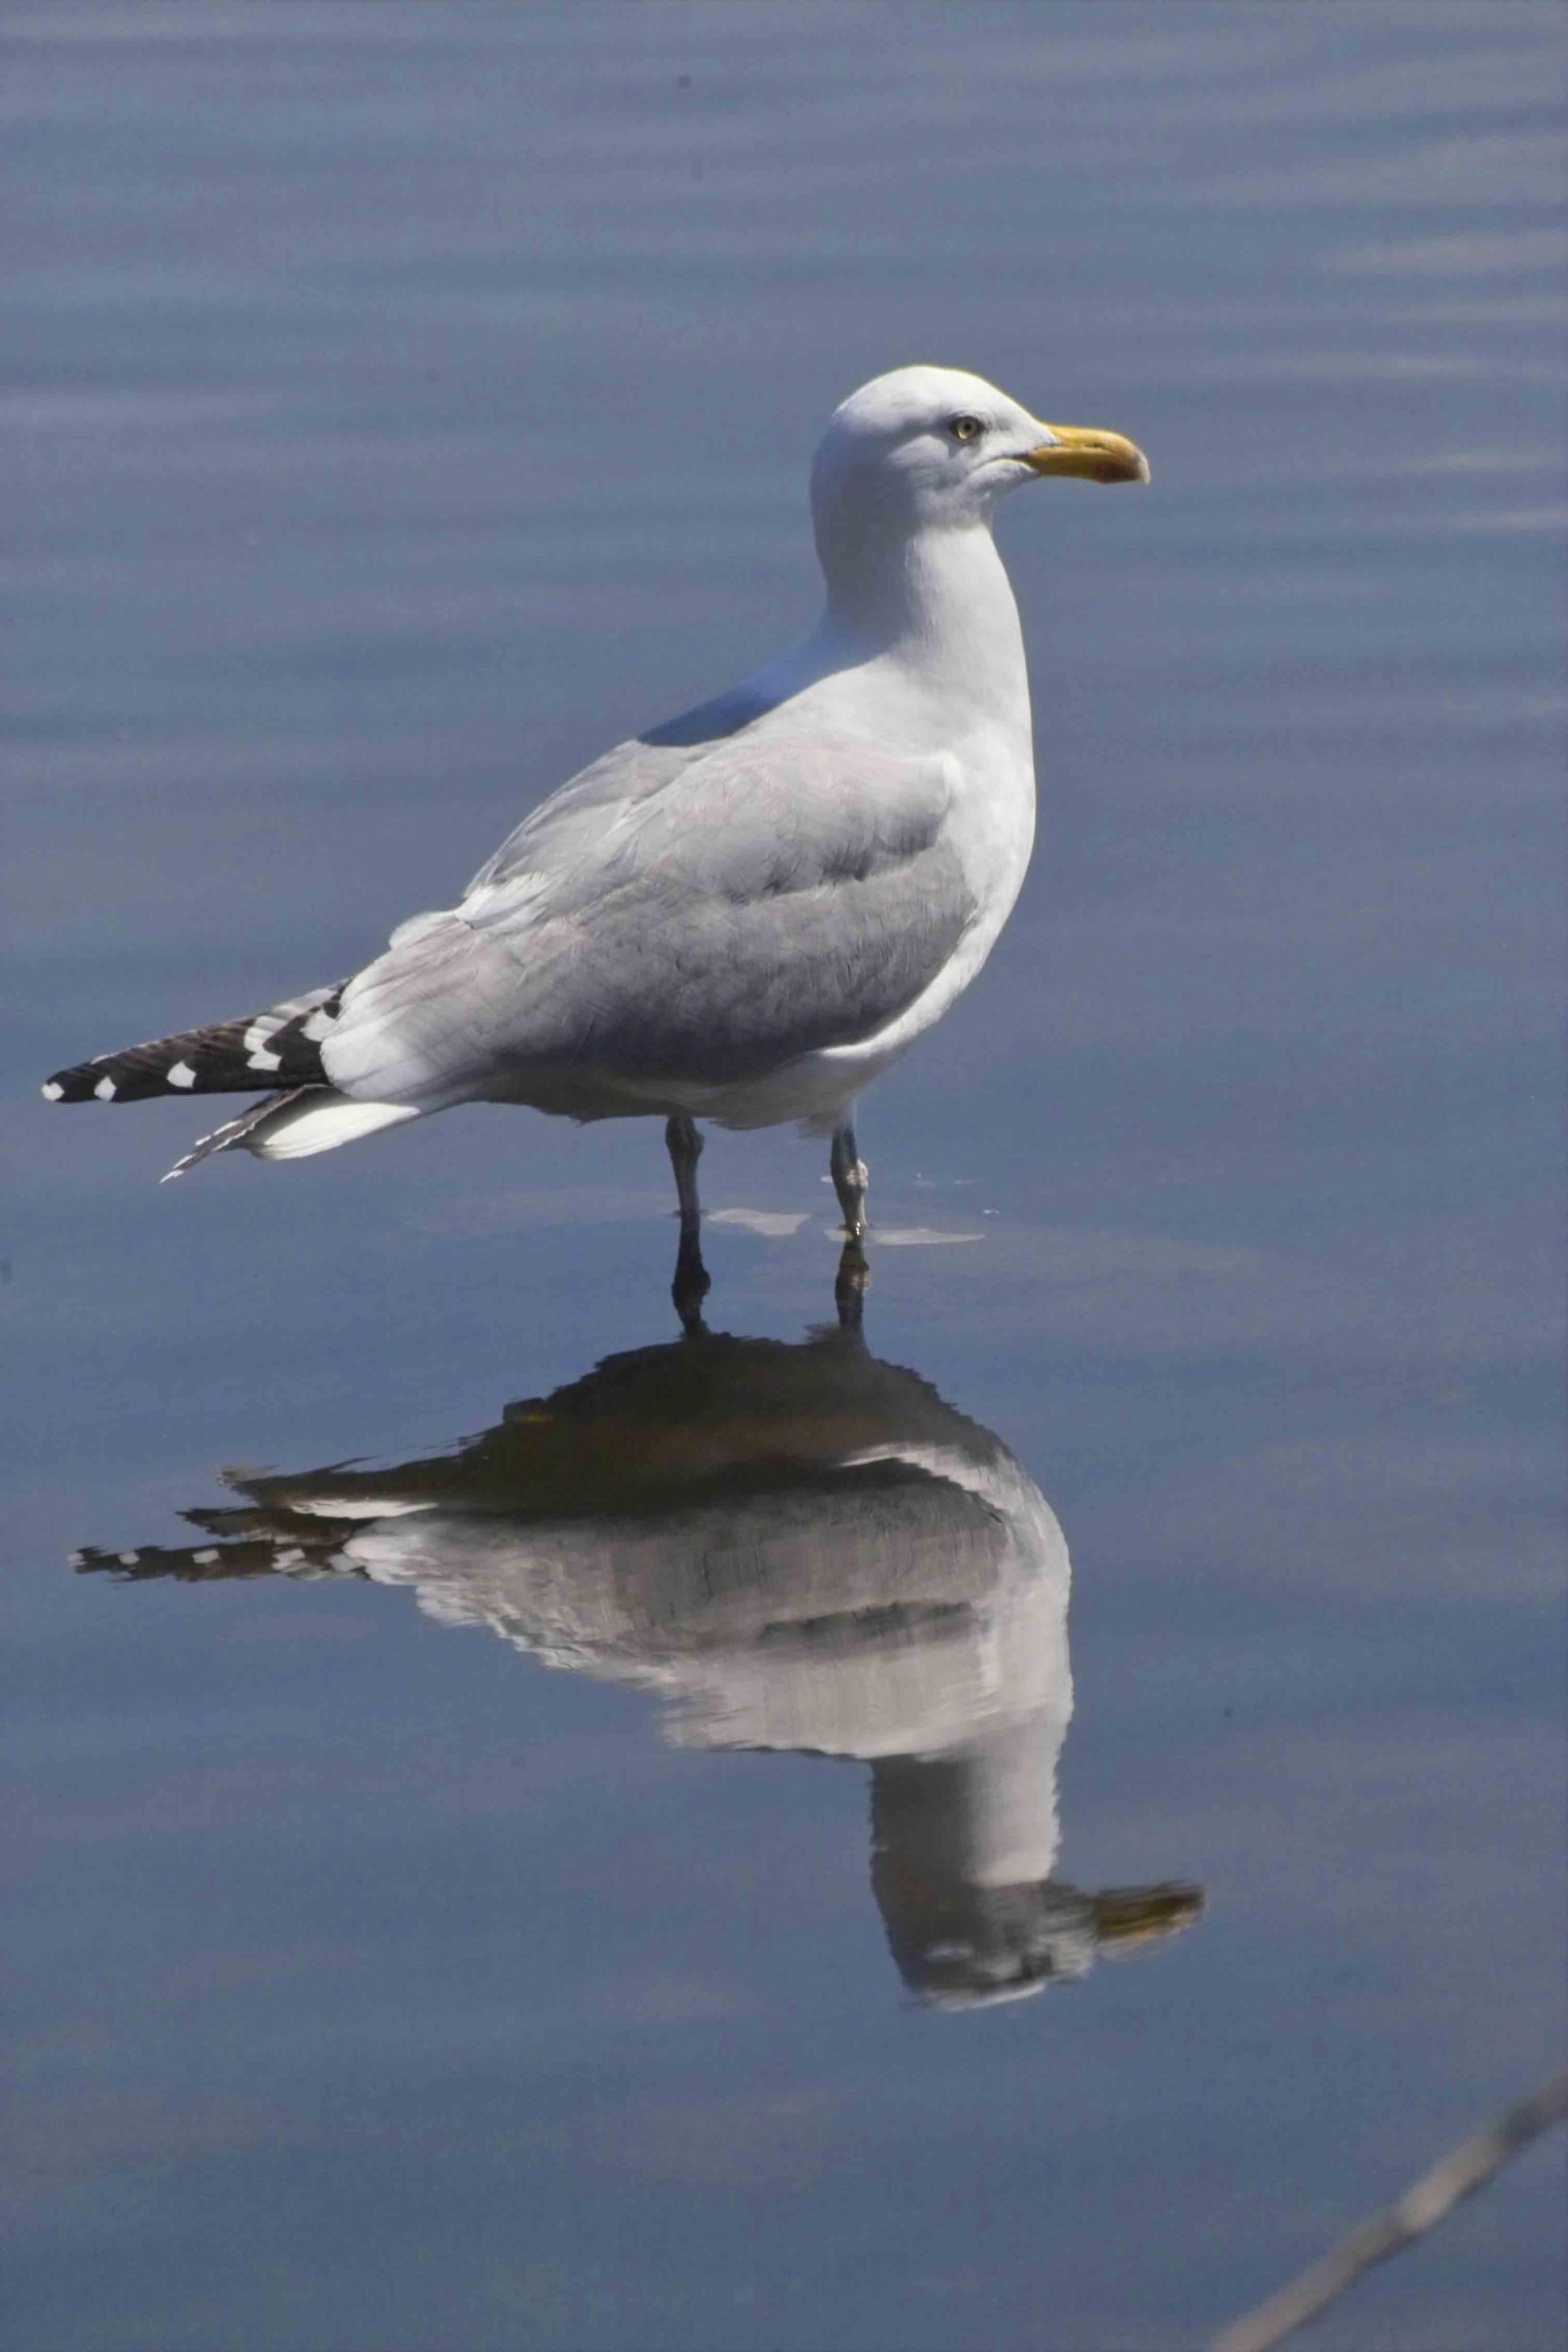 Seagull Reflection (user submitted)